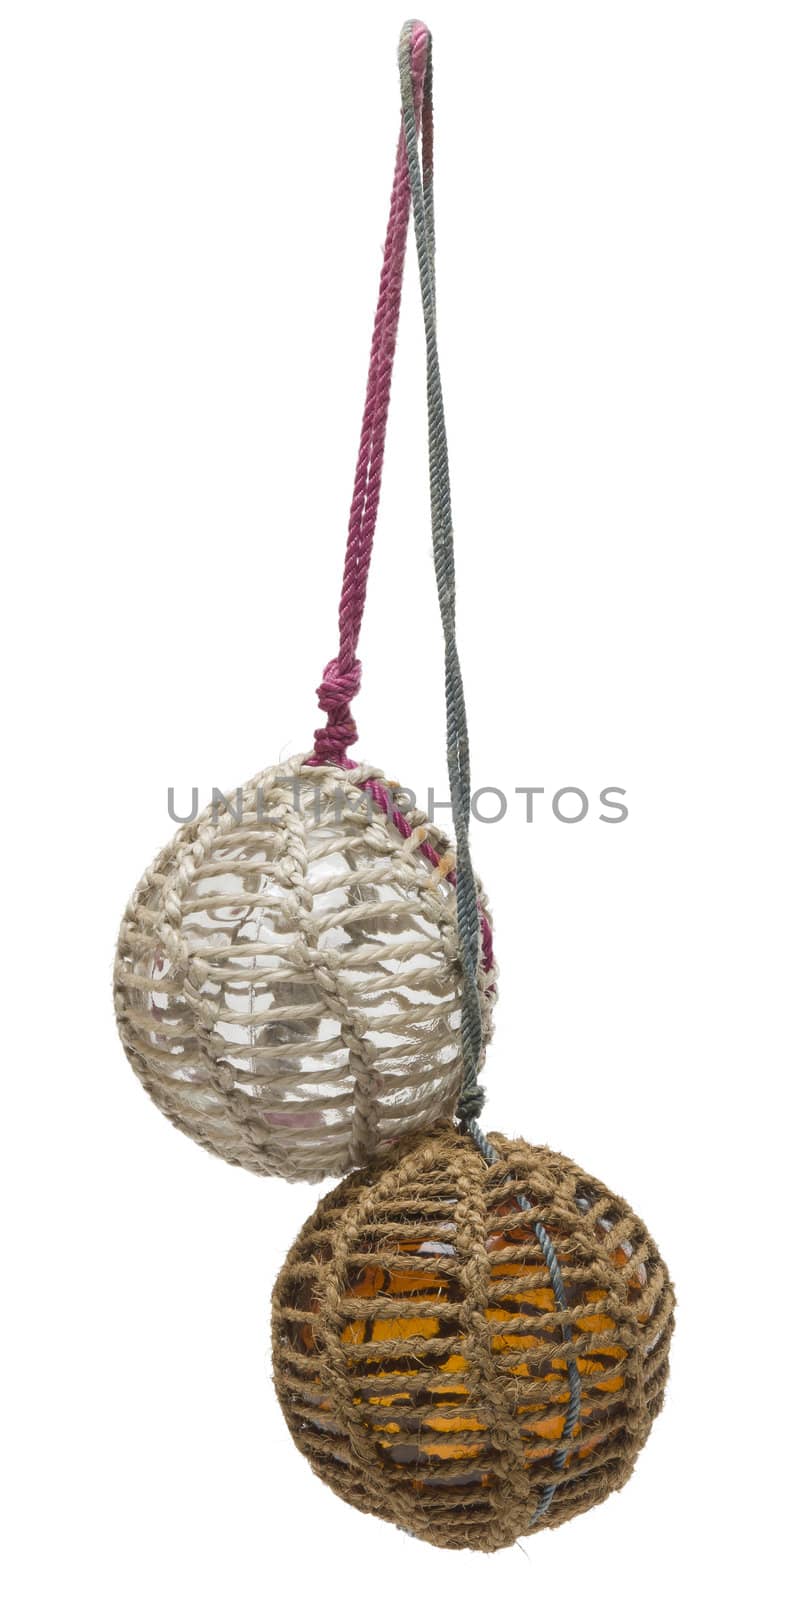 Glass fishing buoy used to keep fishing nets floating. These are old glass antique. Isolated on white background.